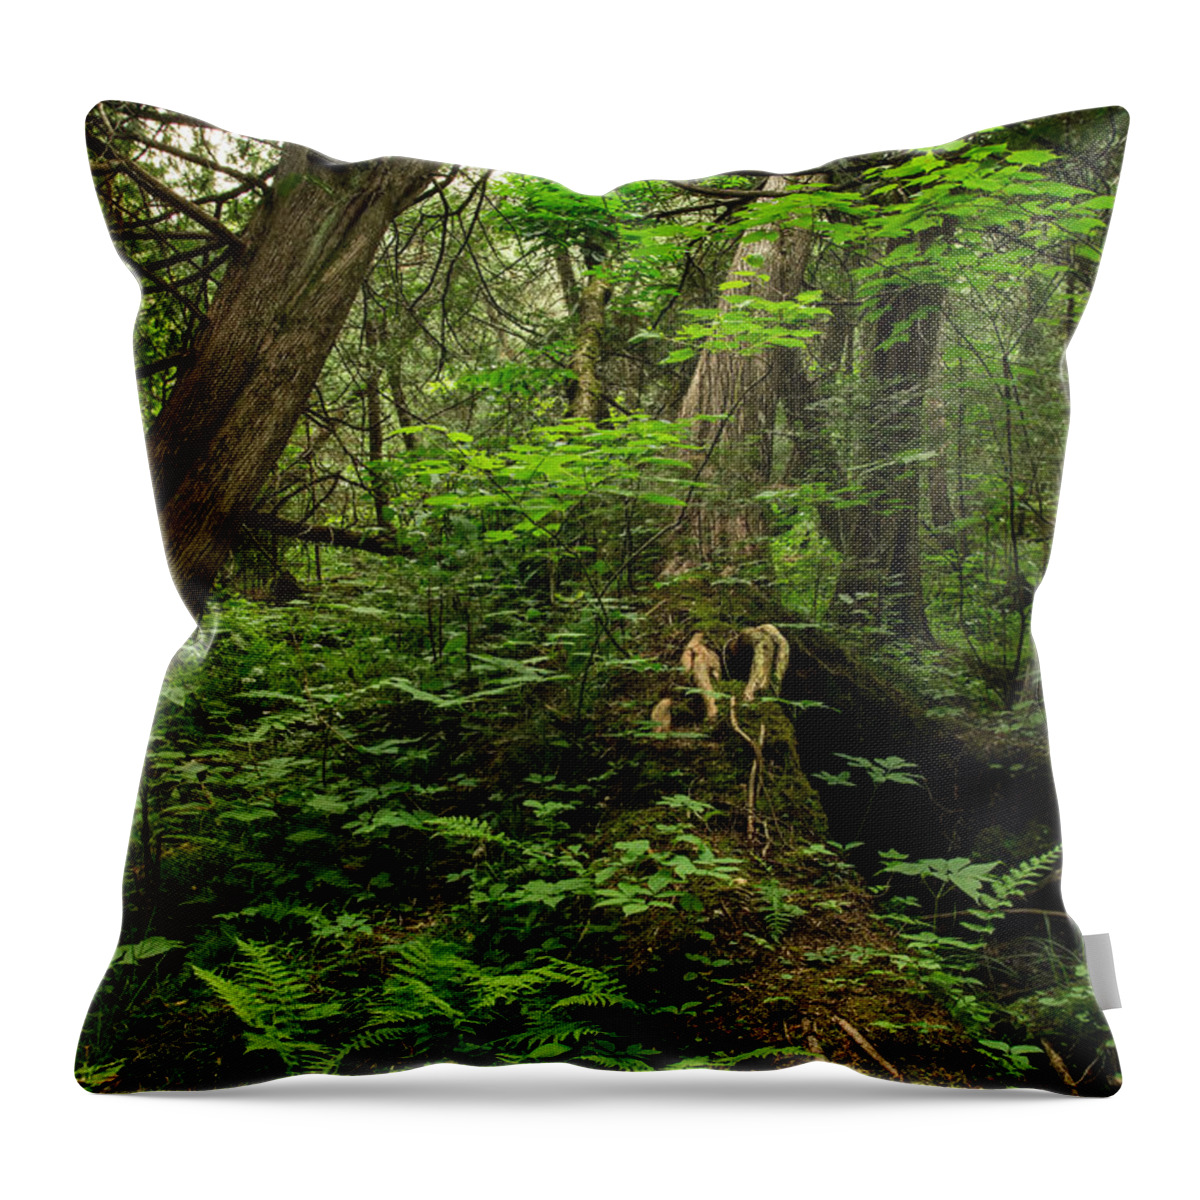 Green Mantle Throw Pillow featuring the photograph Canadian Bush by Jakub Sisak